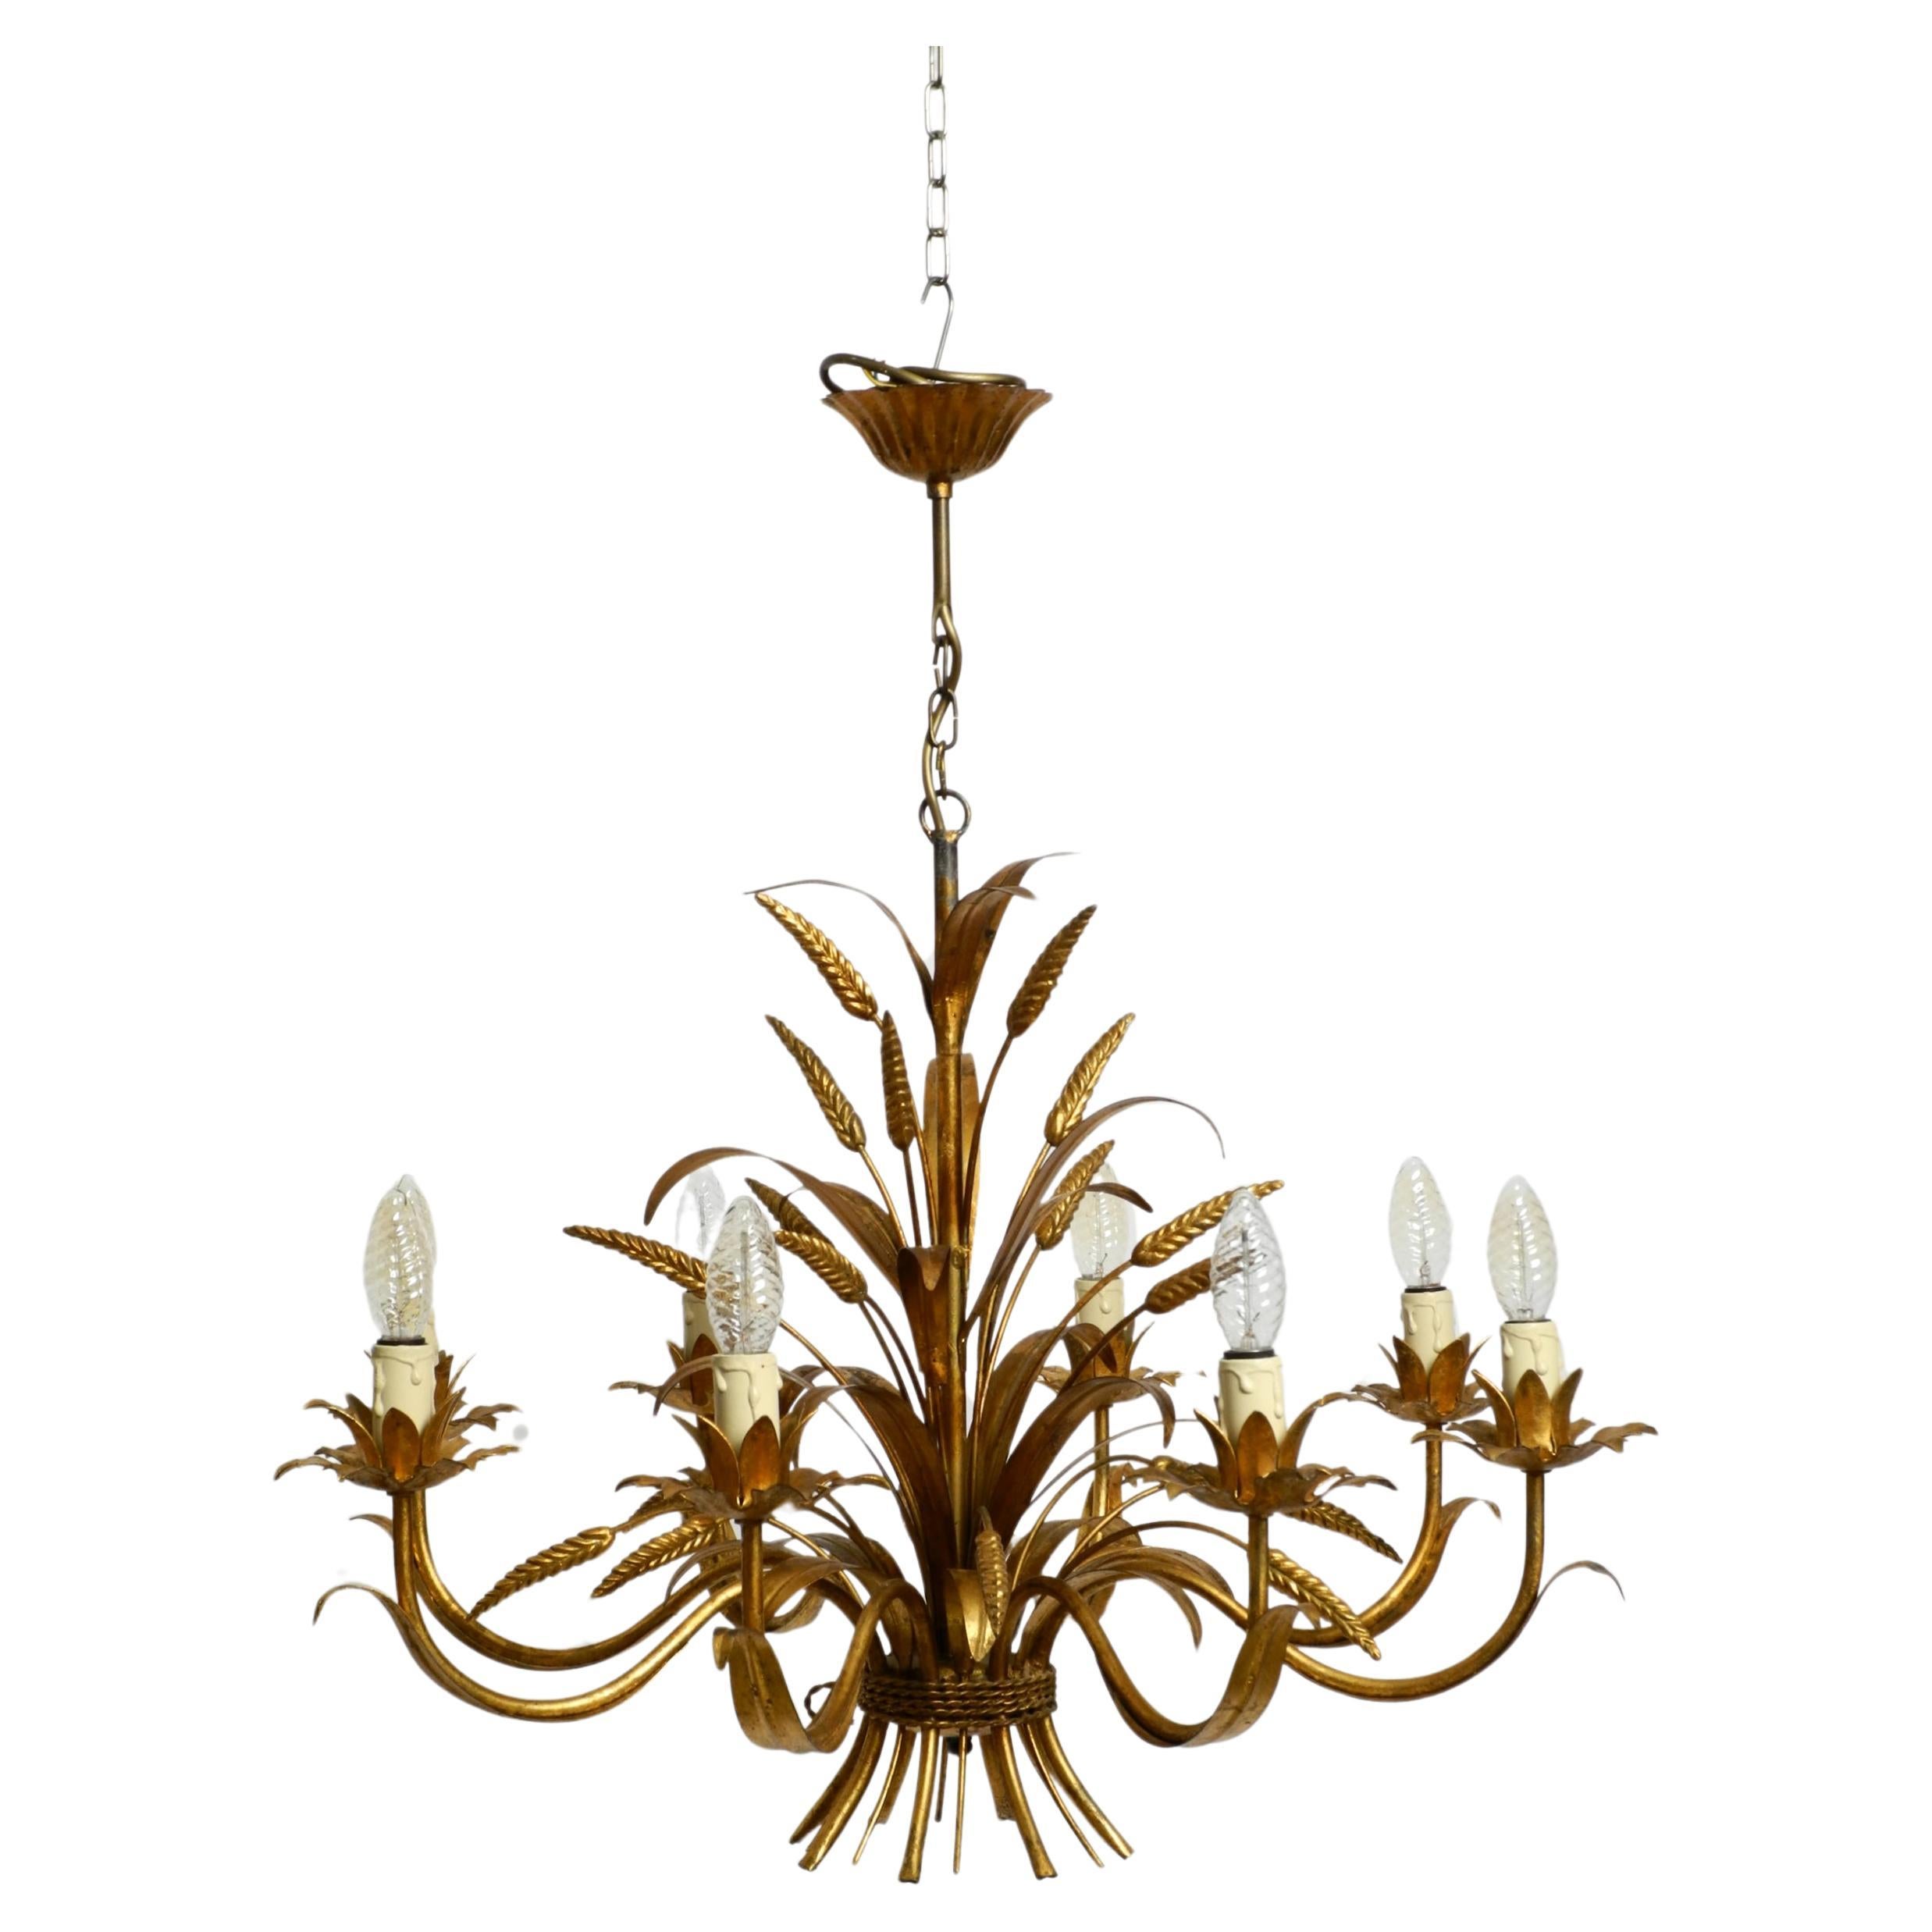 Beautiful huge 70s gold-plated 8-arm metal chandelier by Hans Kögl